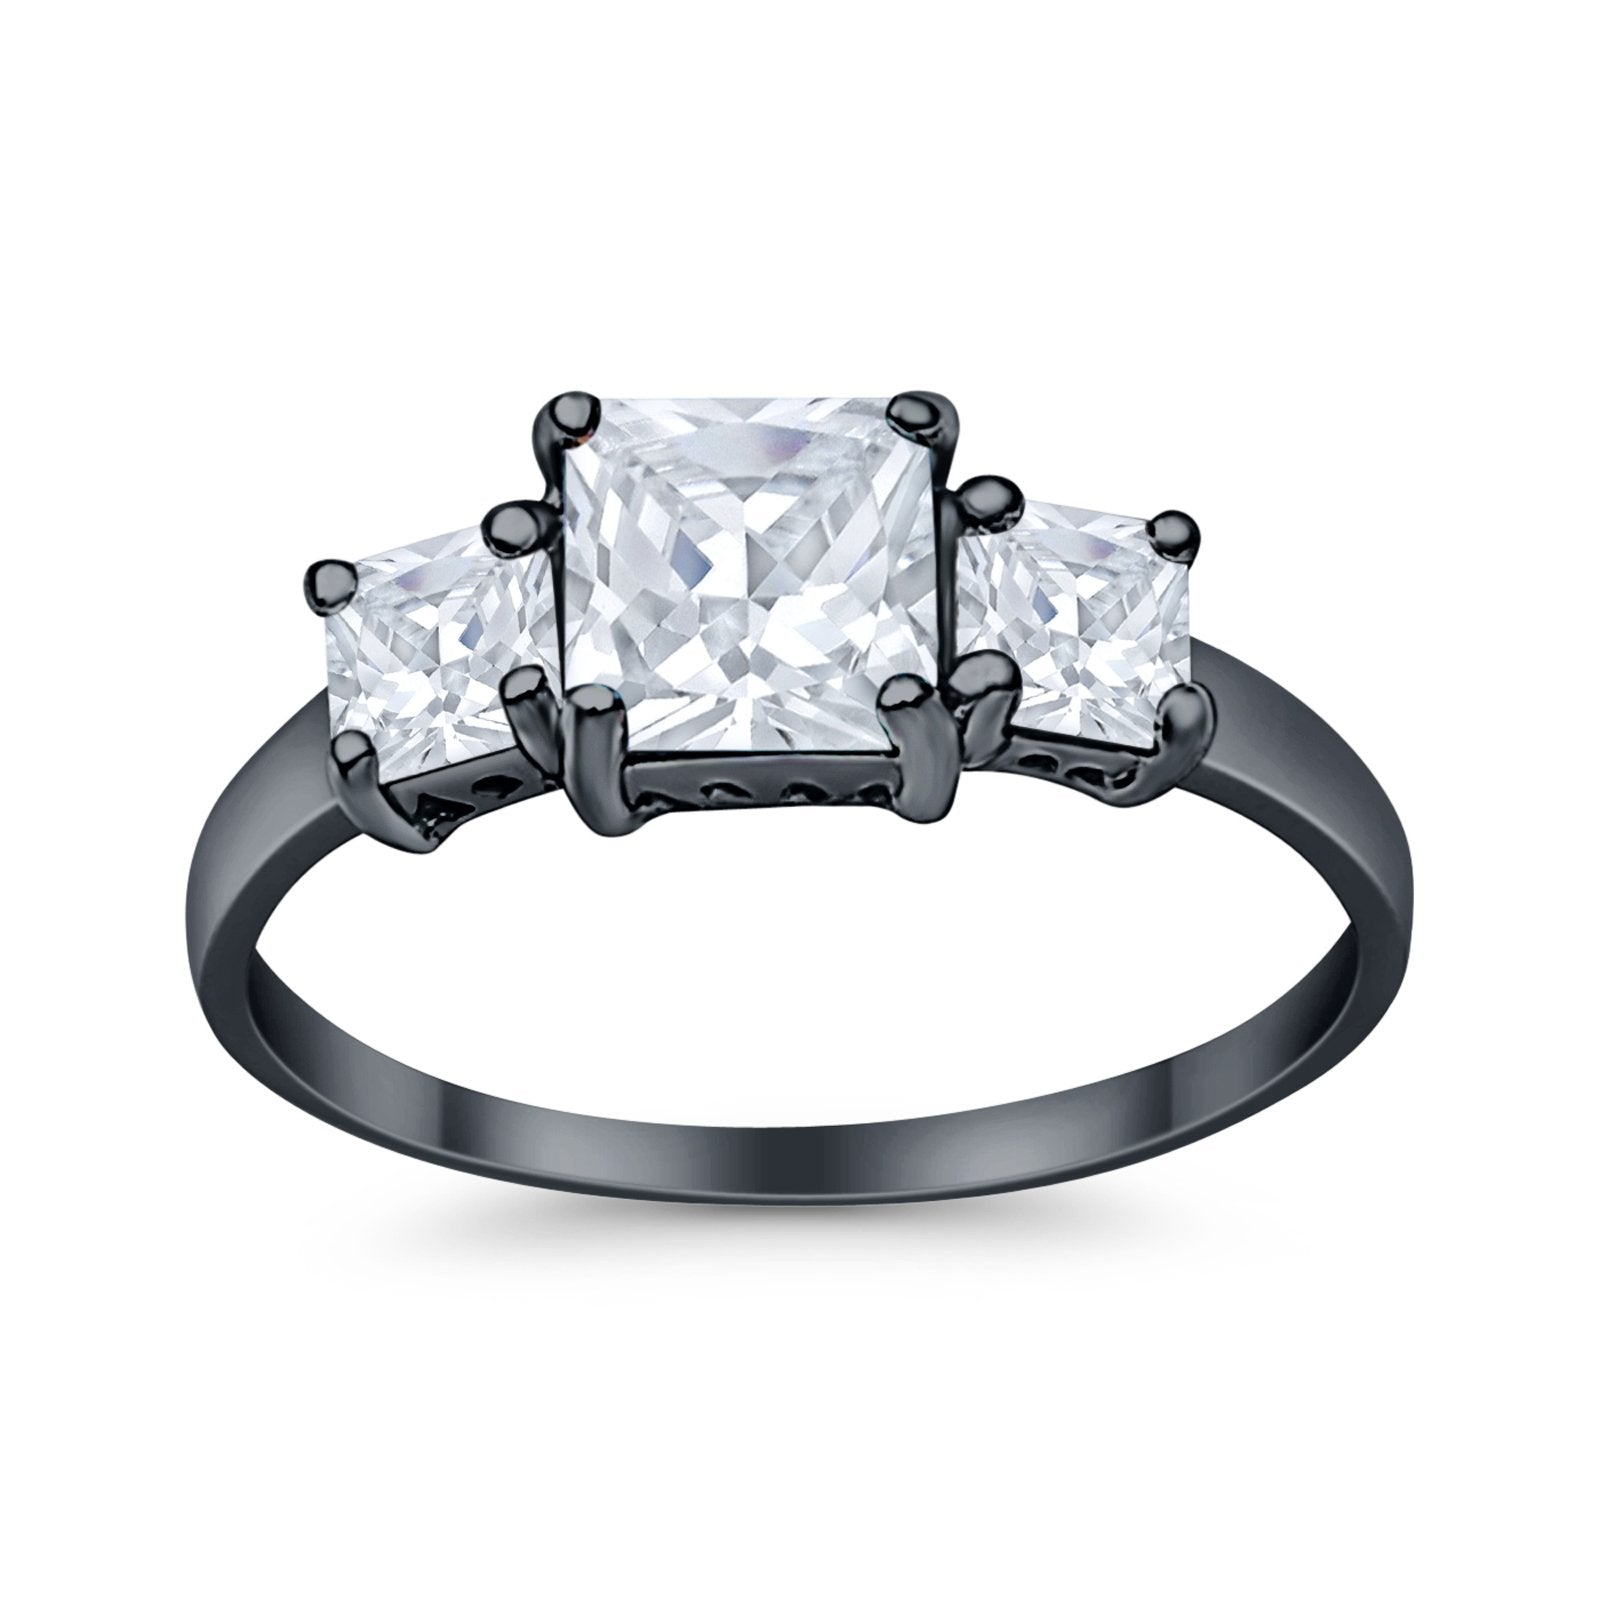 Princess Cut Engagement Ring Simulated Cubic Zirconia 925 Sterling Silver